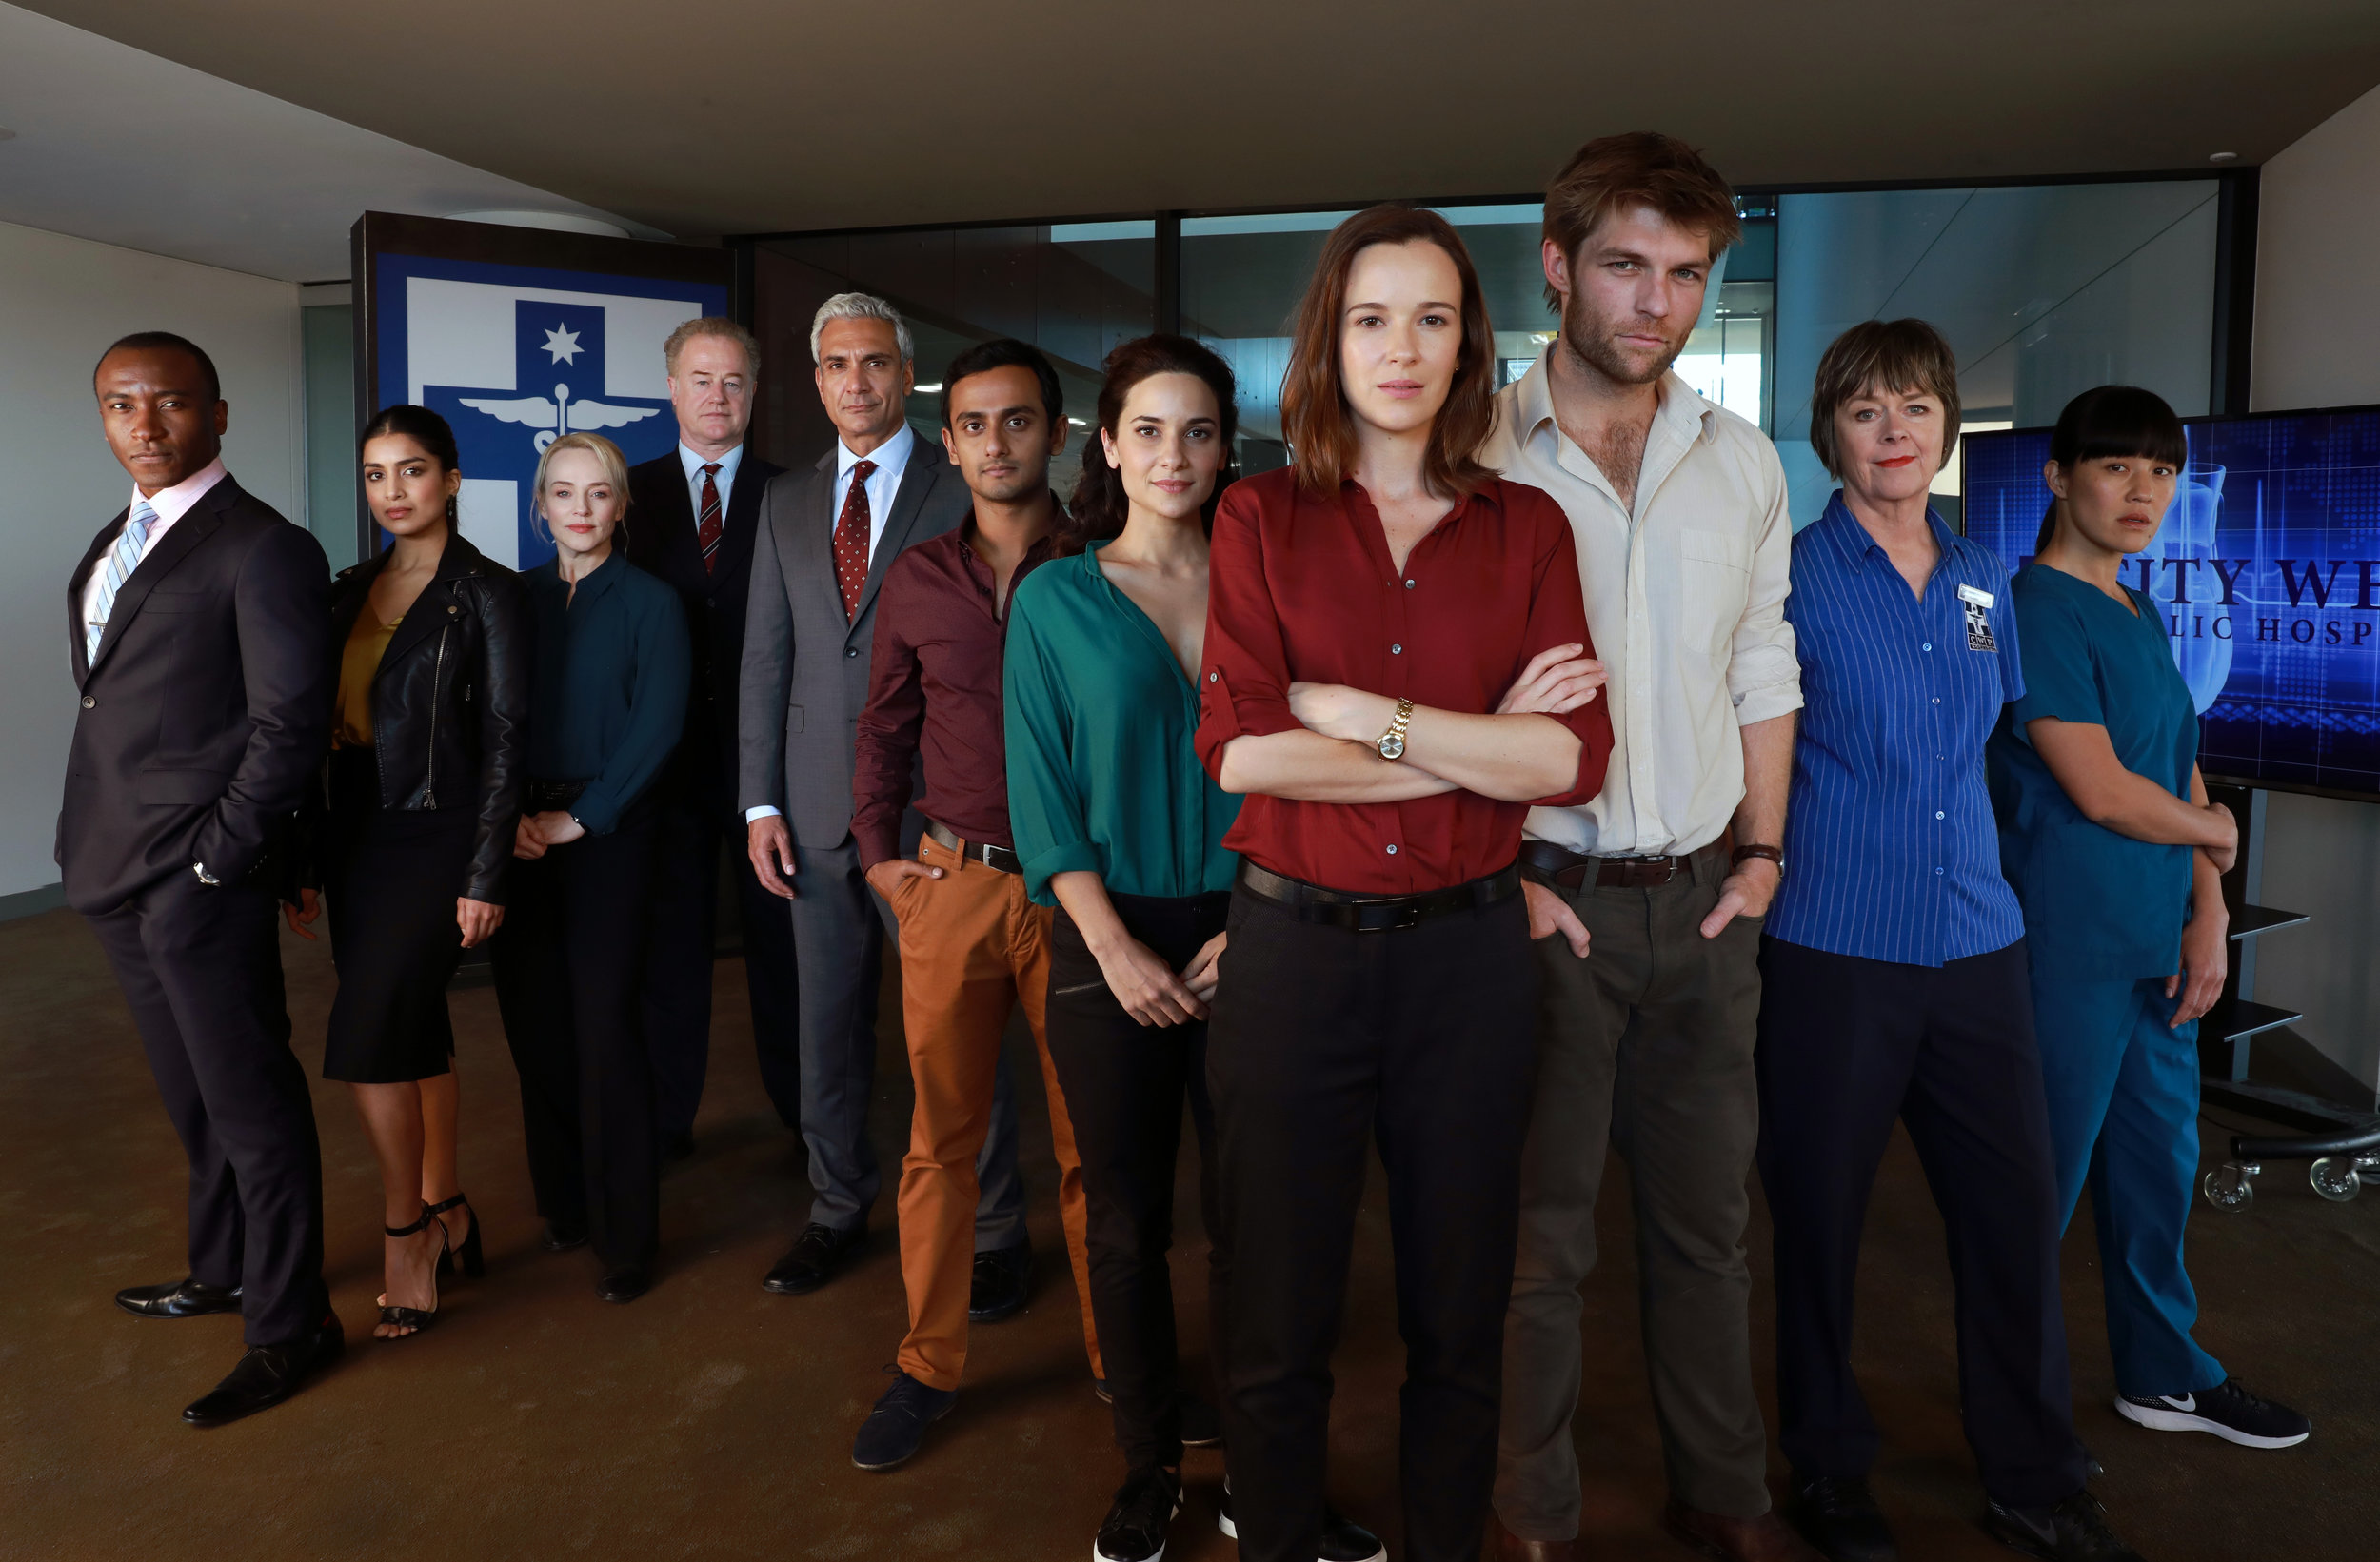   The cast of Pulse  Image - ABC 